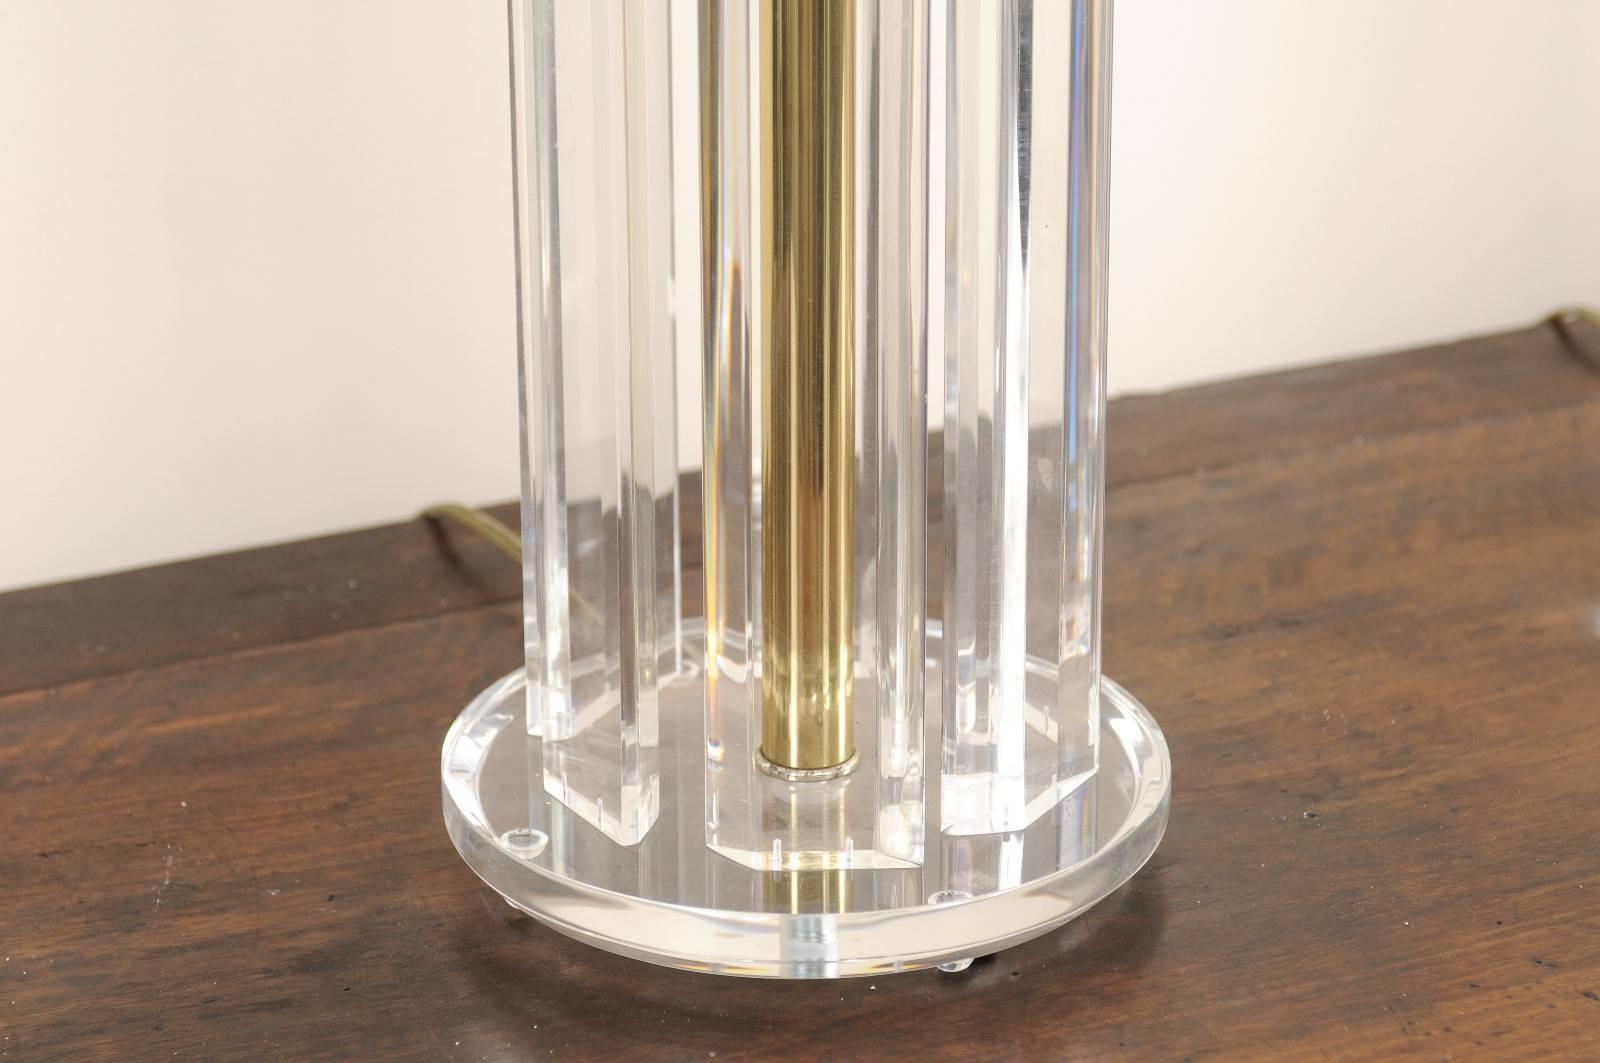 Pair of Lucite Mid-20th Century Table Lamps with Round Shape and Gold Tones 5